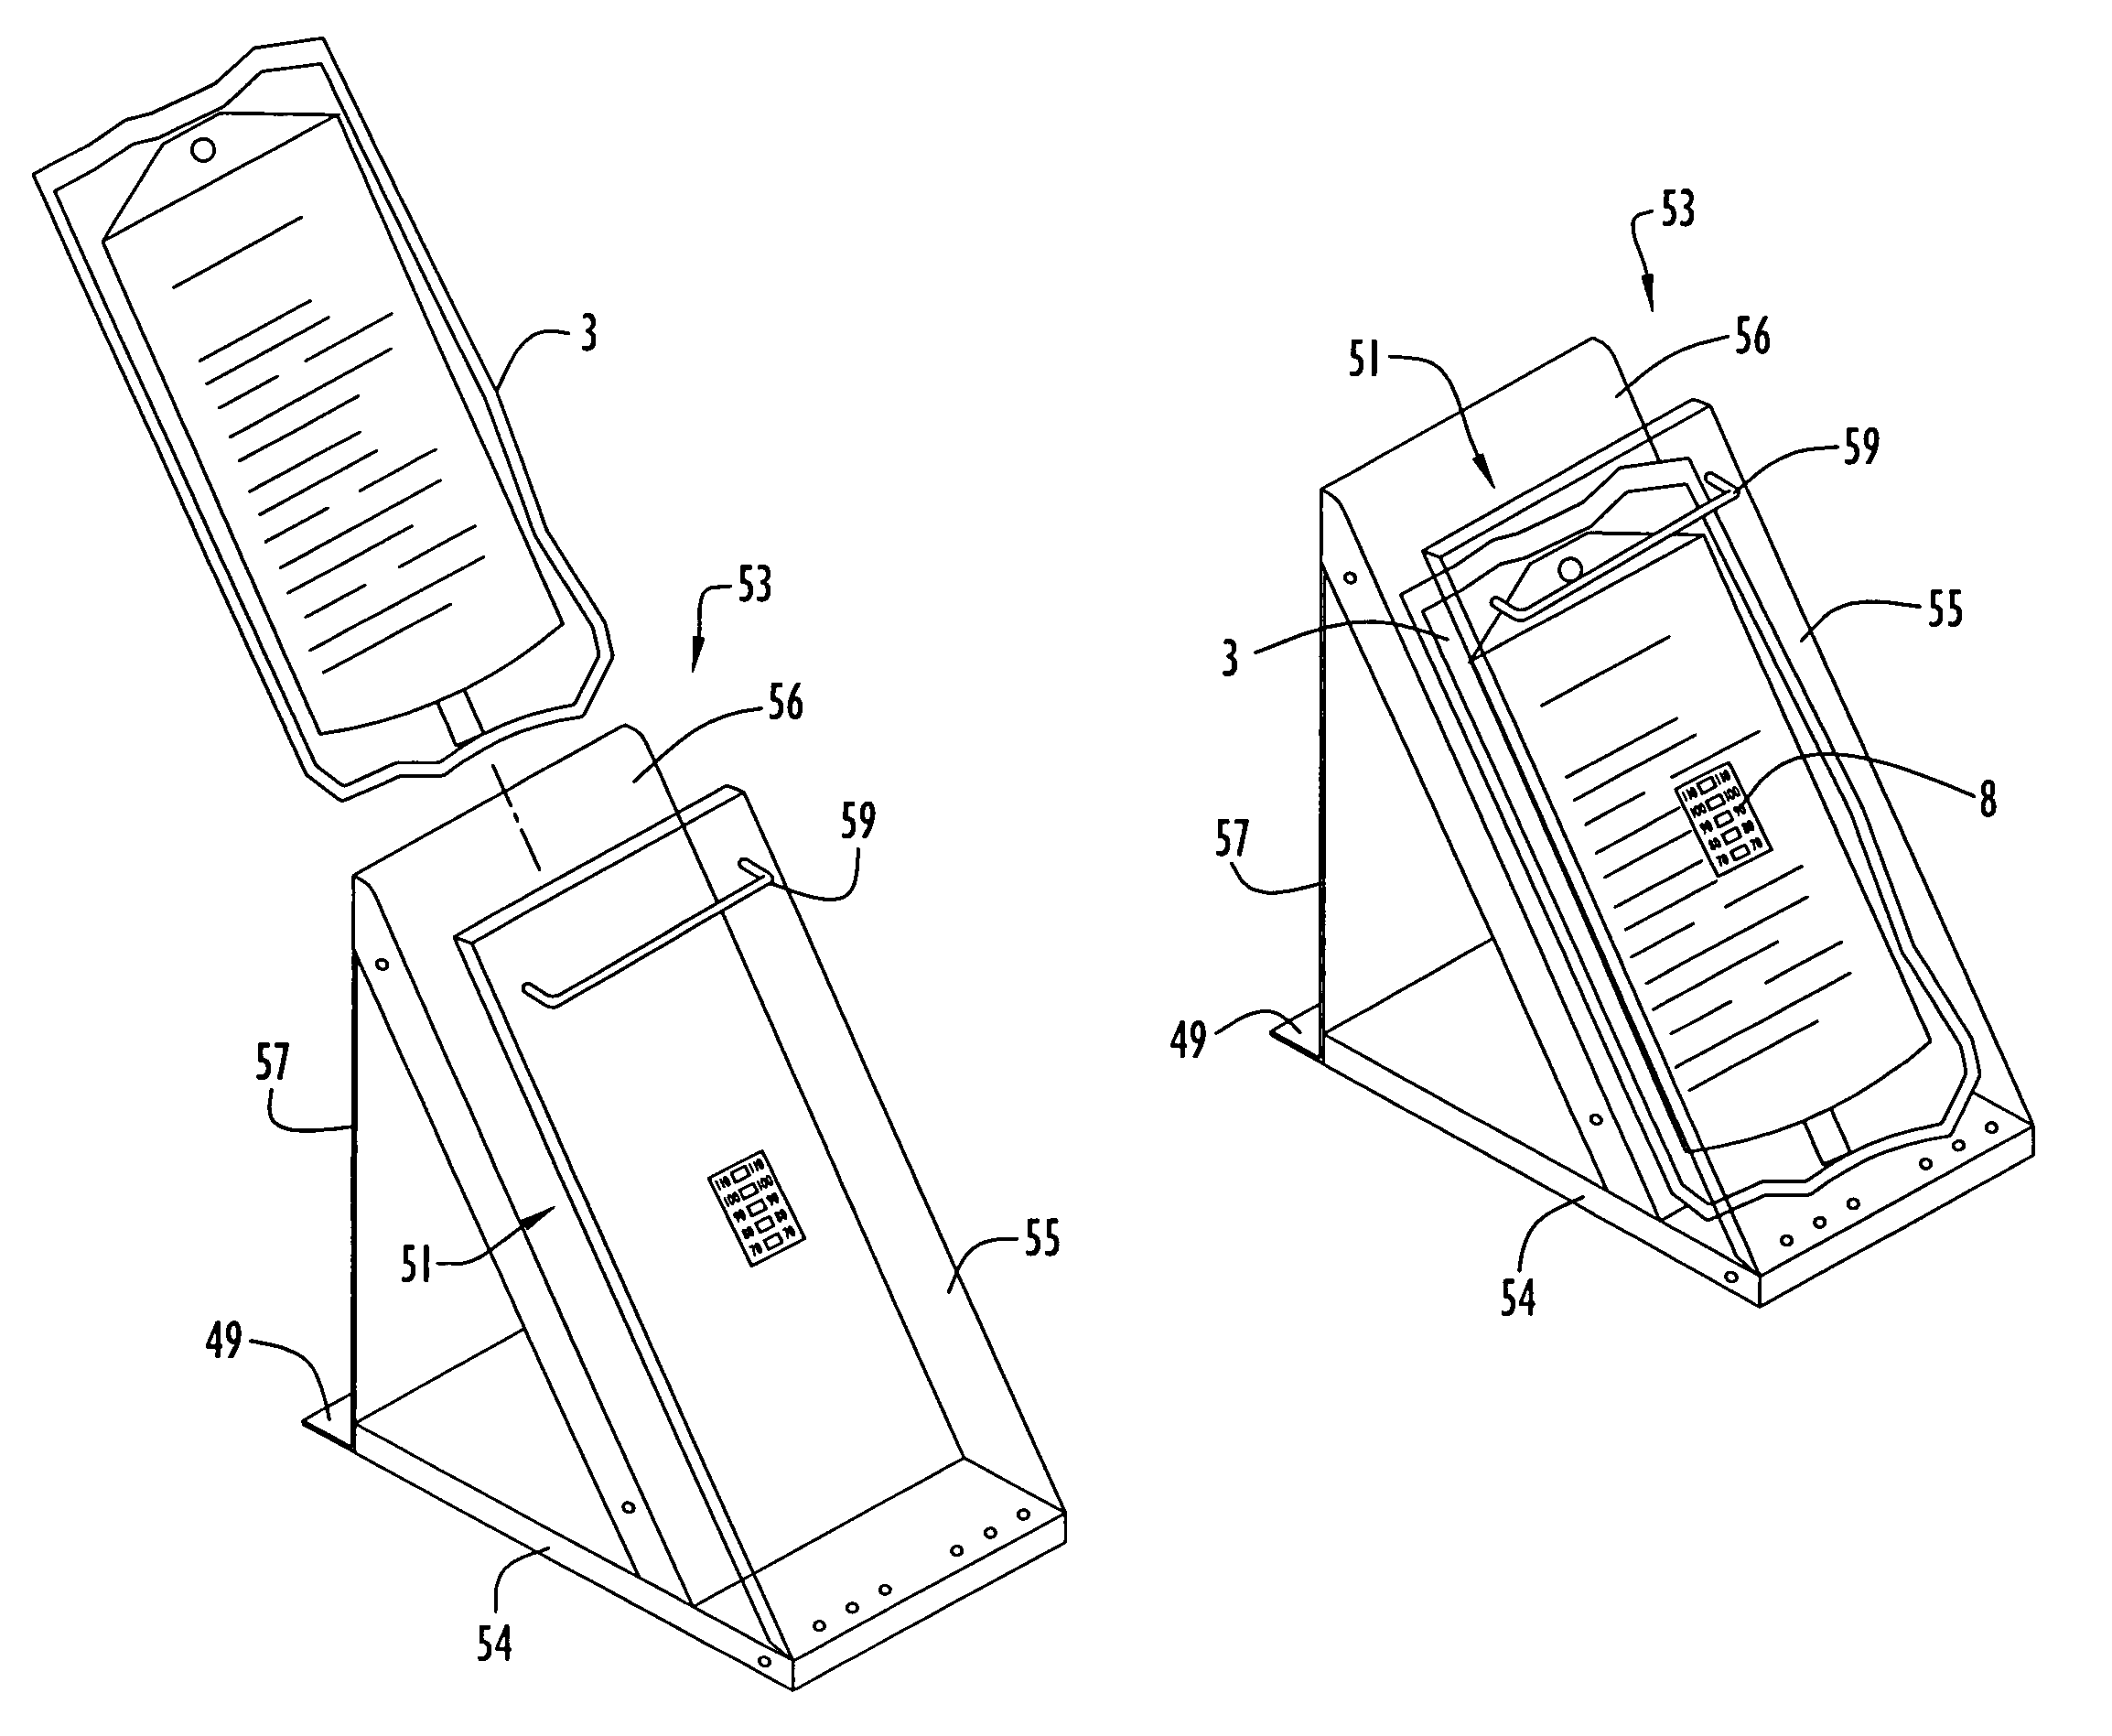 Method and apparatus for monitoring temperature of intravenously delivered fluids and other medical items